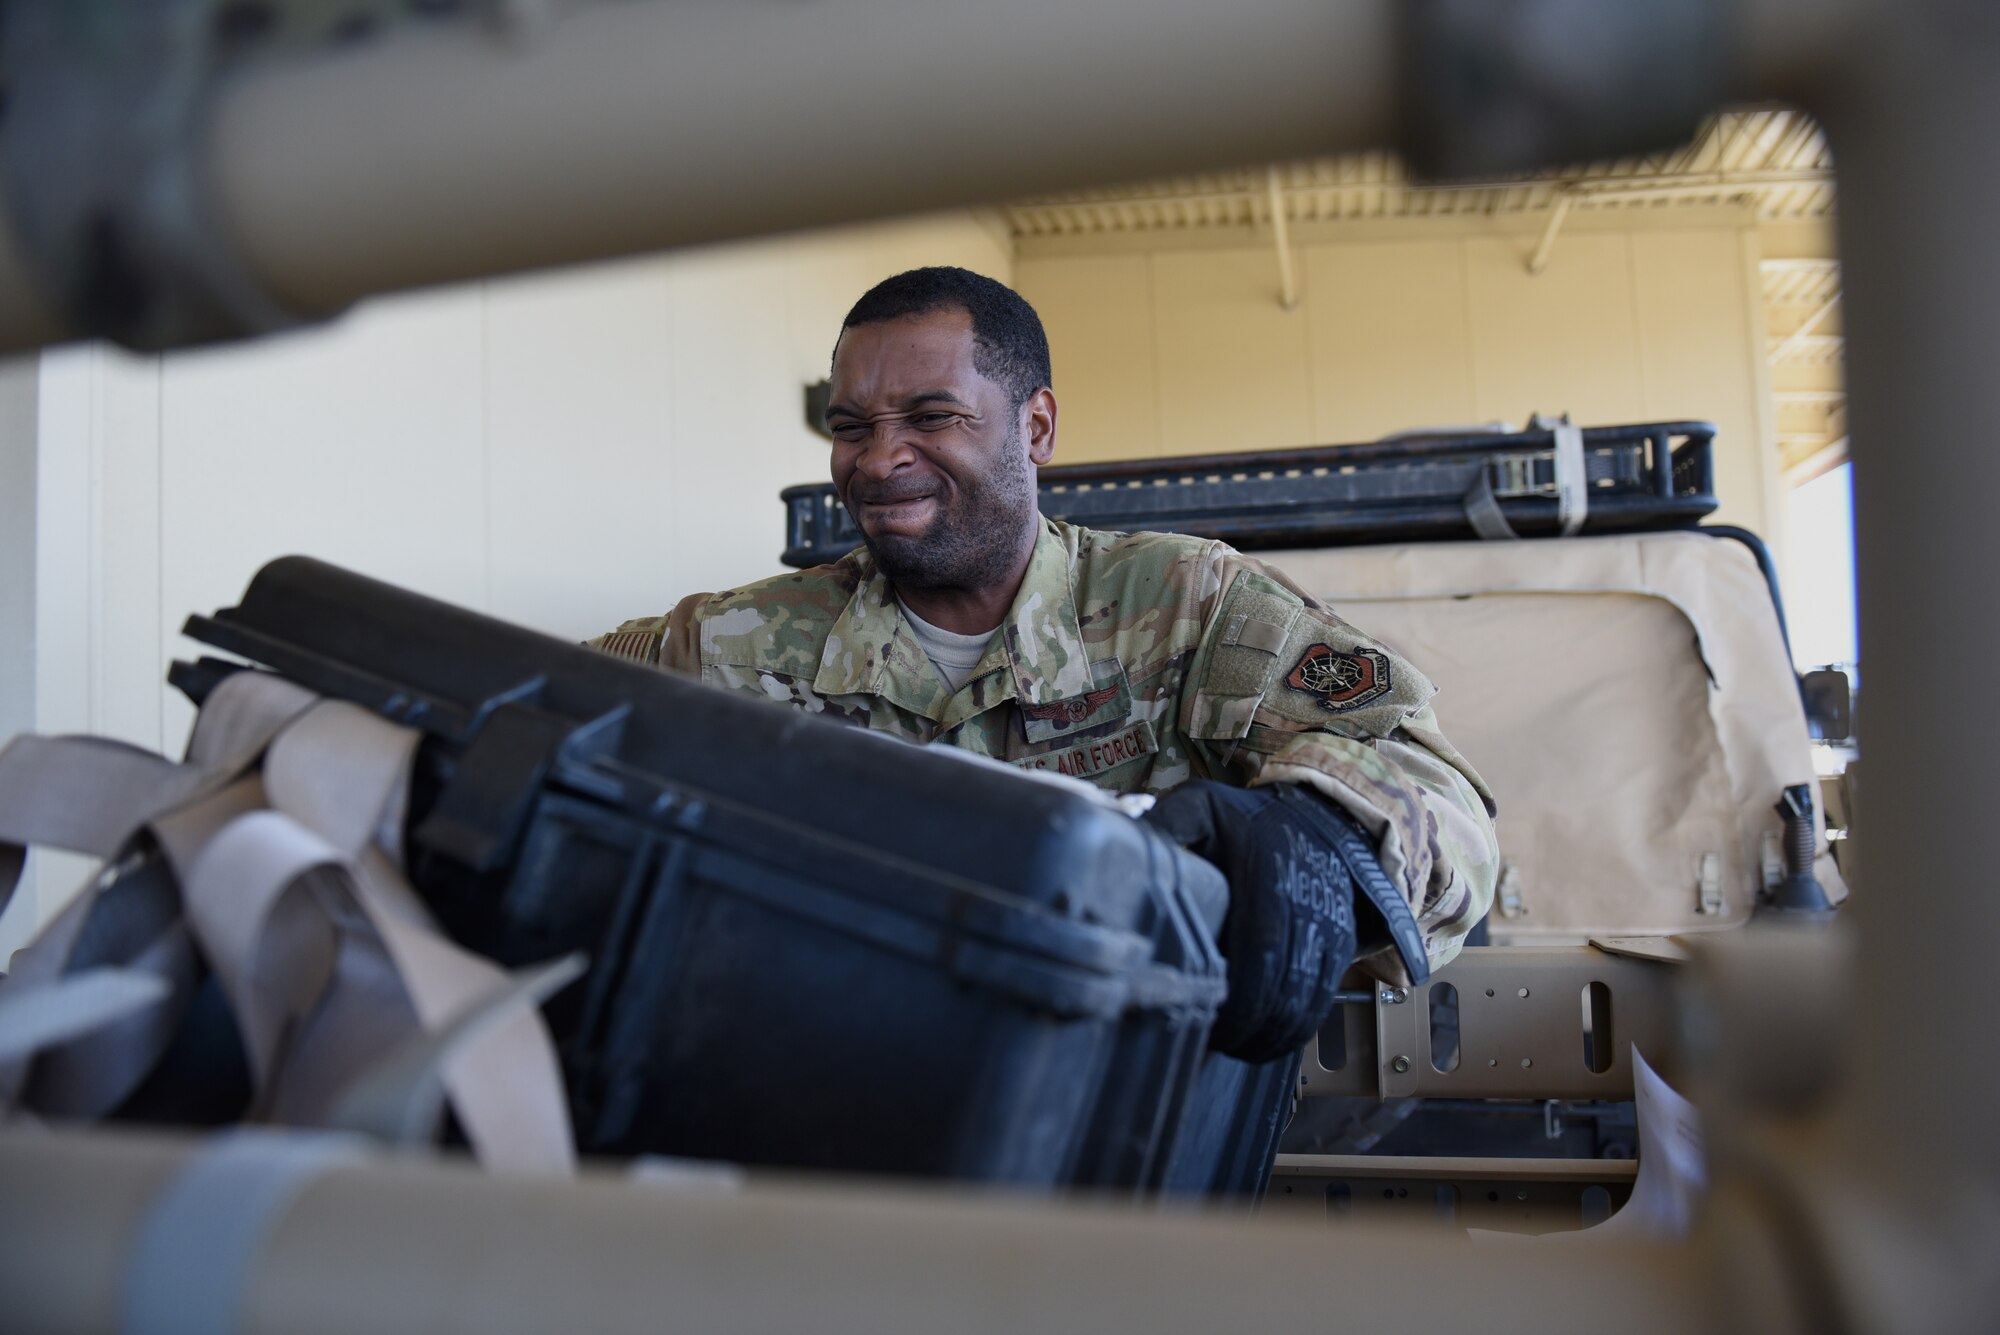 U.S. Air Force Staff Sgt. Brandon Mckoy, 821st Contingency Response Support Squadron airfield assessment team member, loads equipment into truck in support of Mobility Guardian 2019 Sept. 12, 2019, at Travis Air Force Base, California. MG19 is Air Mobility Command’s flagship exercise for large-scale rapid global mobility operations. Travis AFB is serving as a staging base for the exercise, which is taking place at Fairchild AFB, Washington. (U.S. Air Force photo by Airman First Class Cameron Otte)